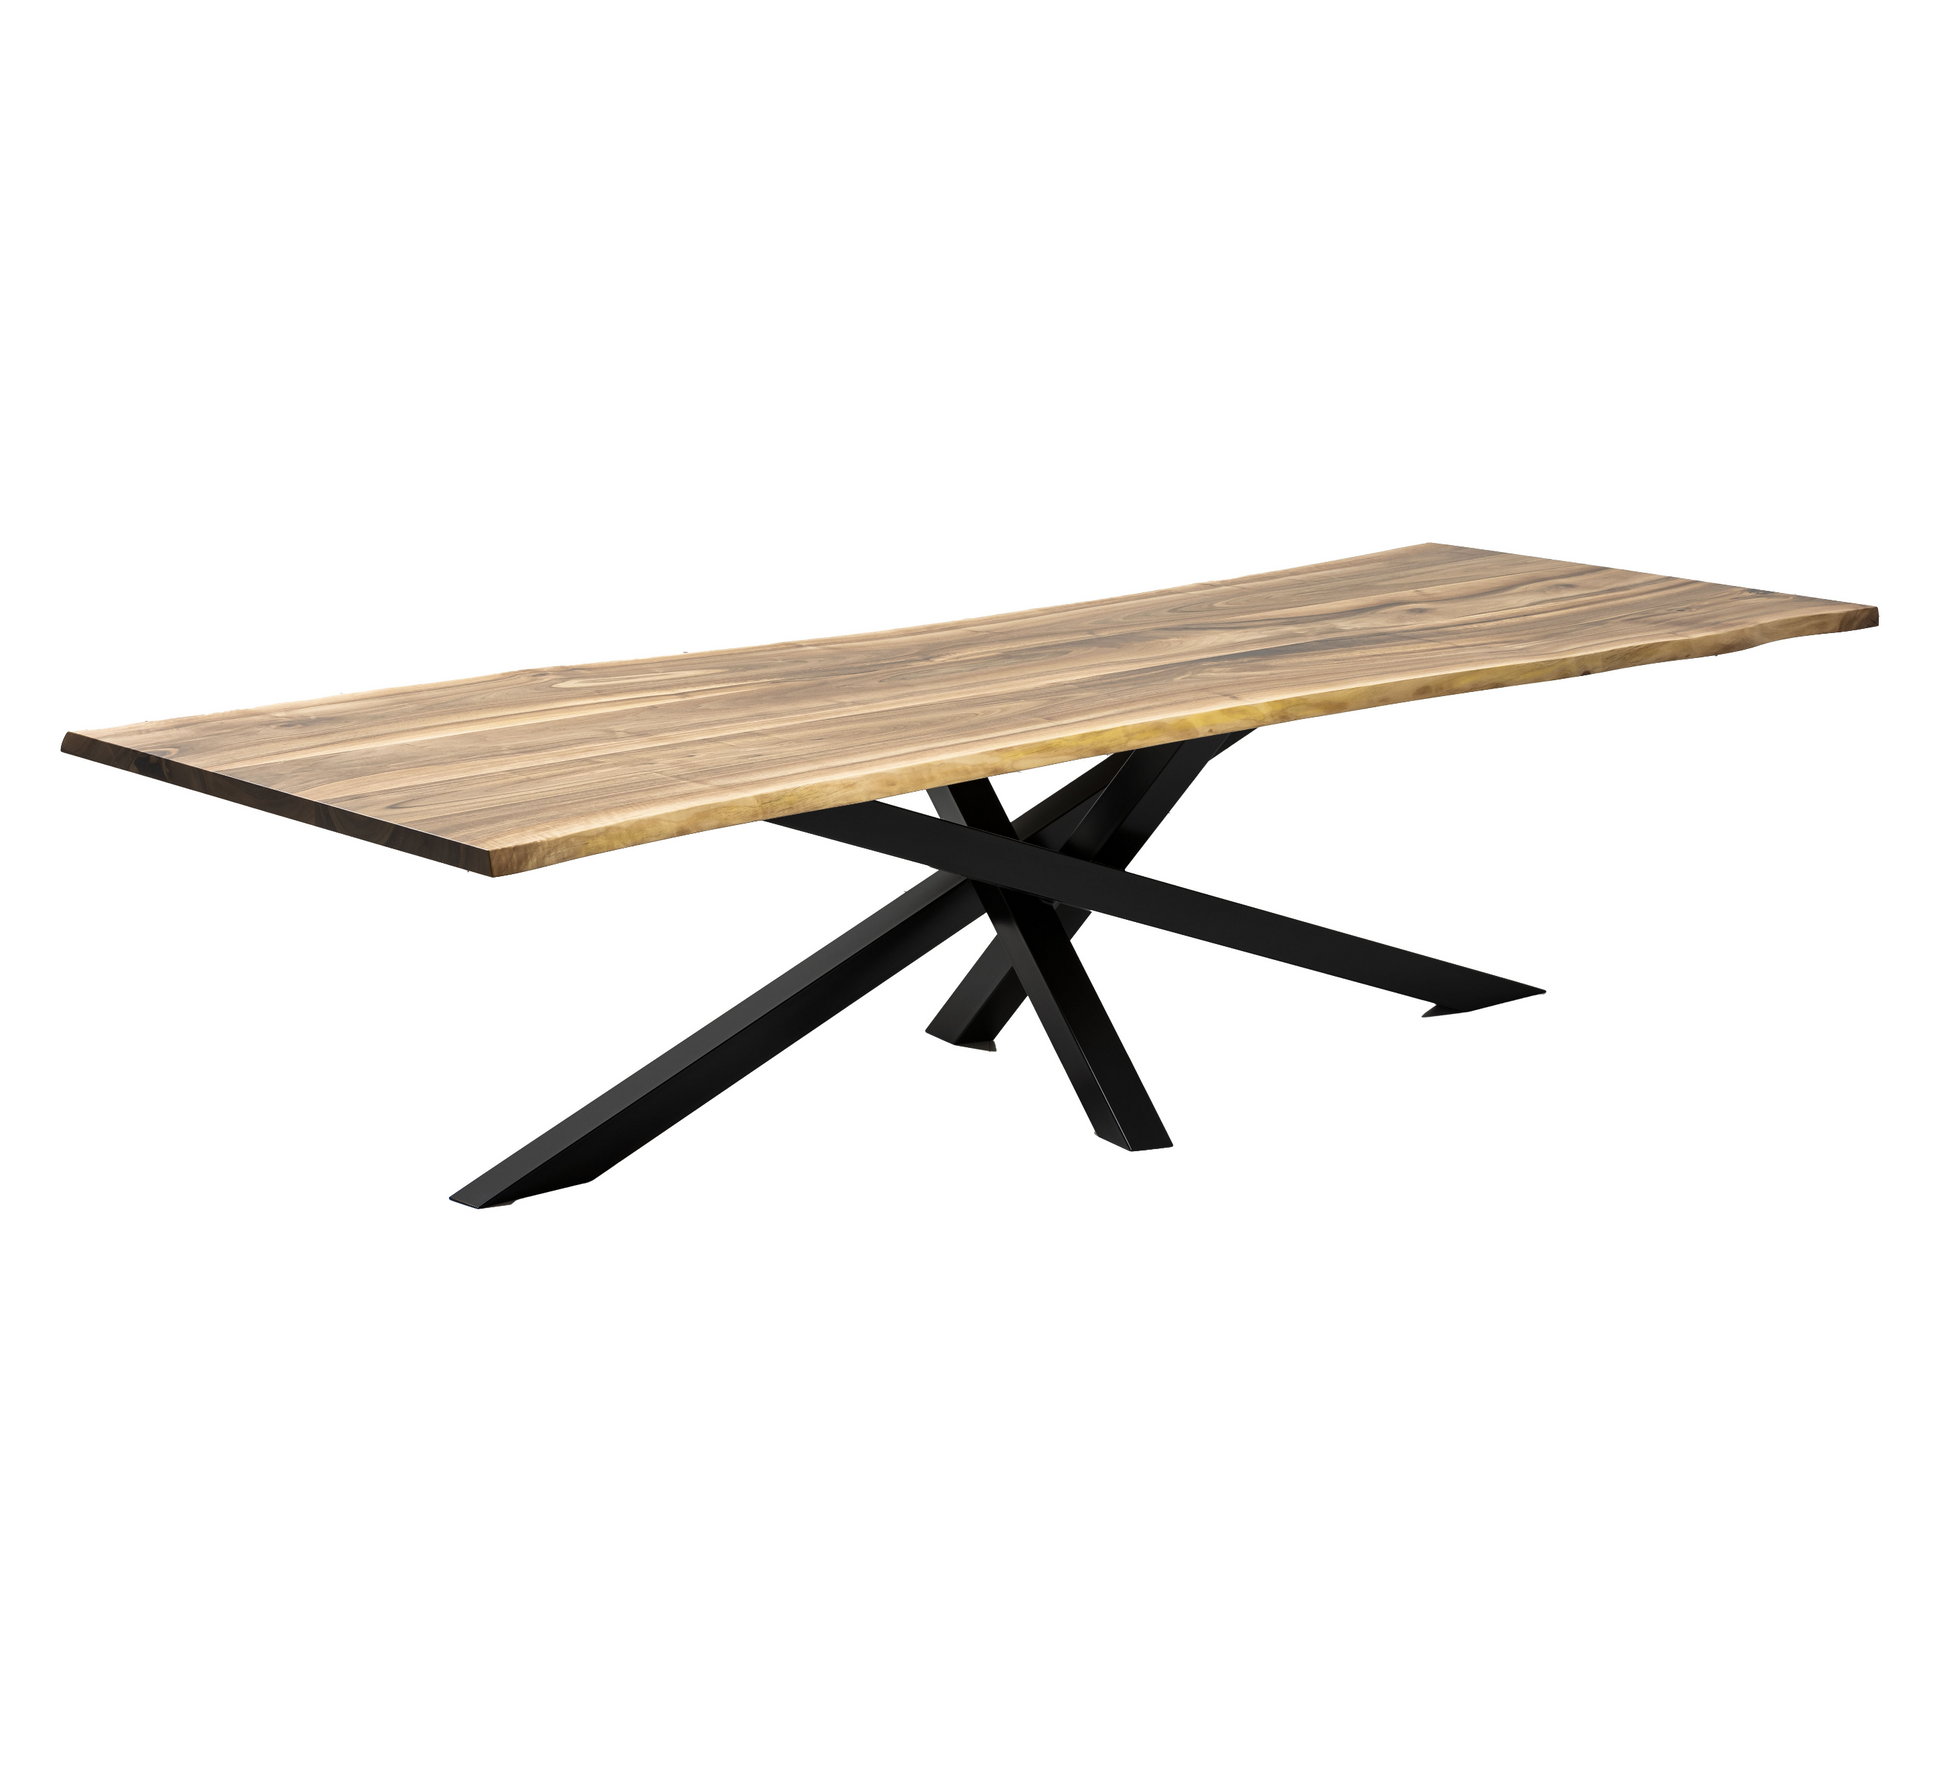 Julia Walnut Dining Table Extendable Spider Legs| S10Home